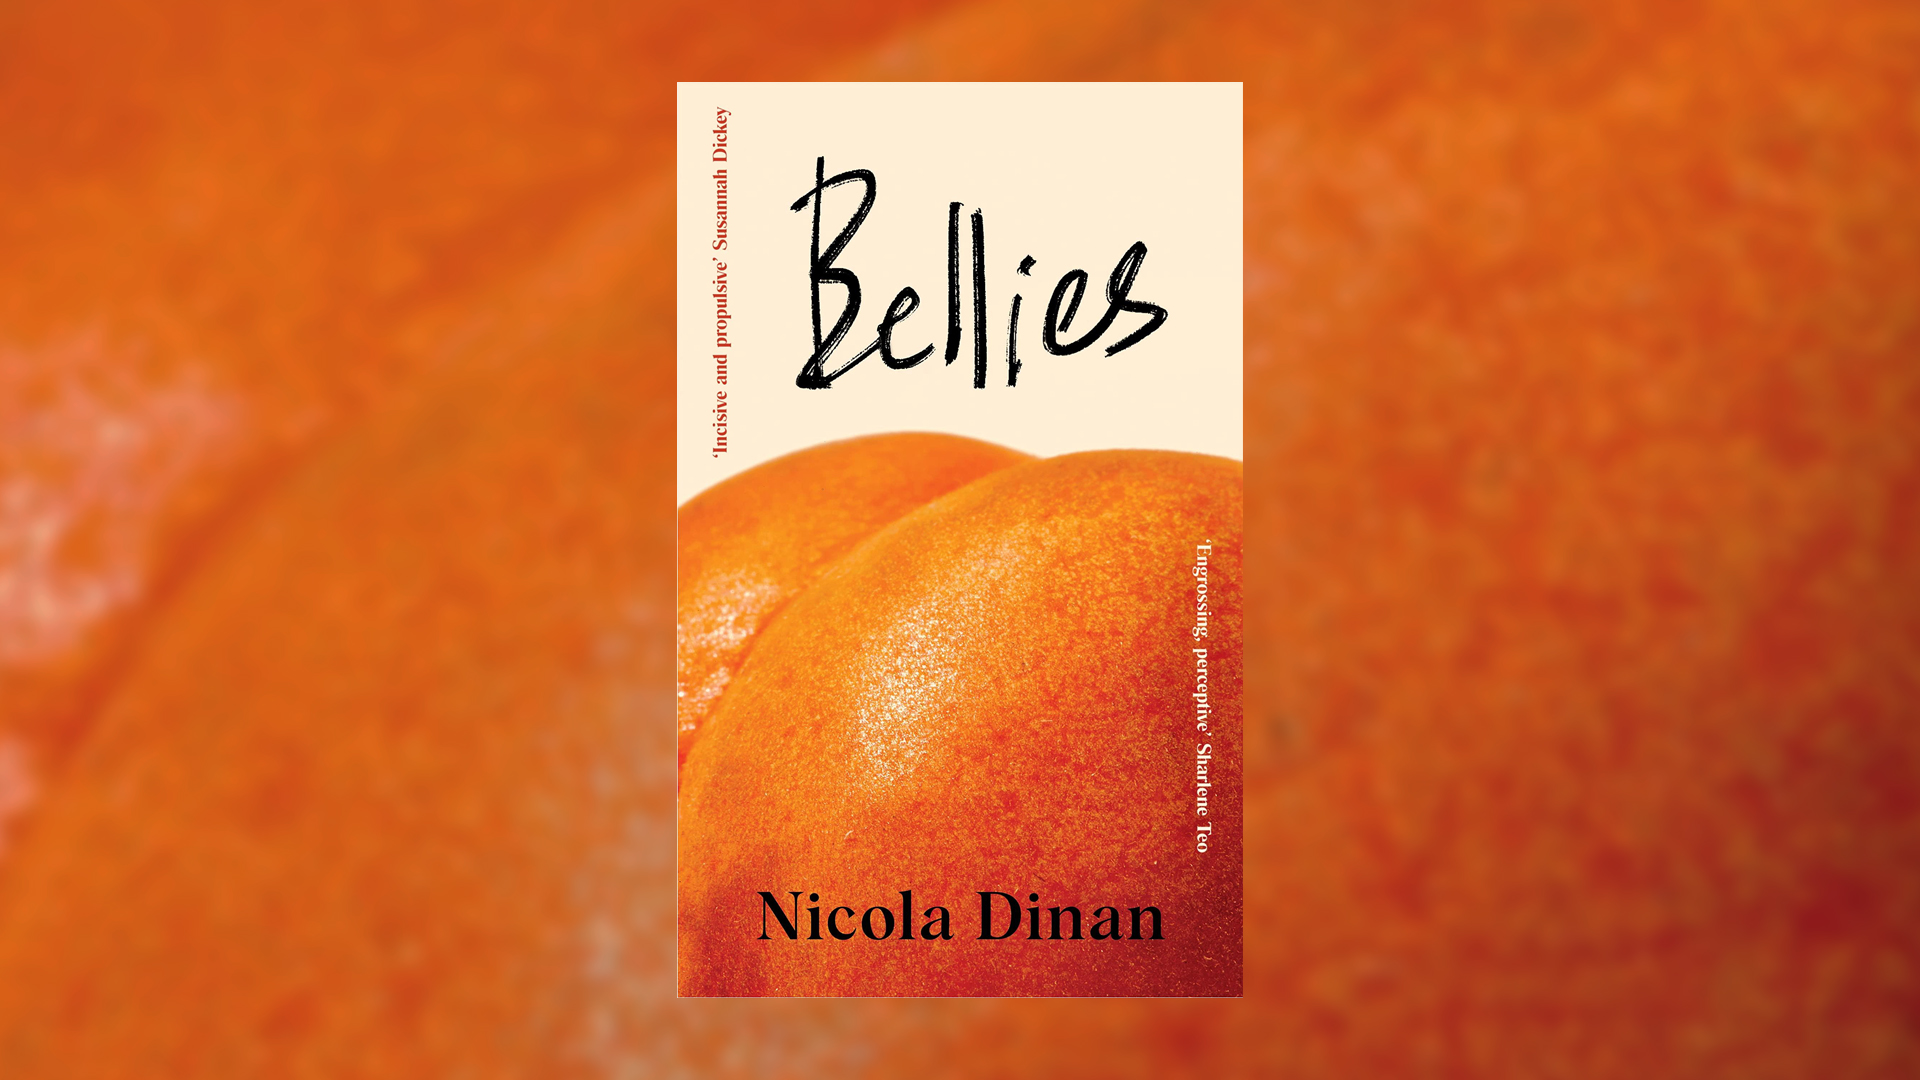 Bellies book cover